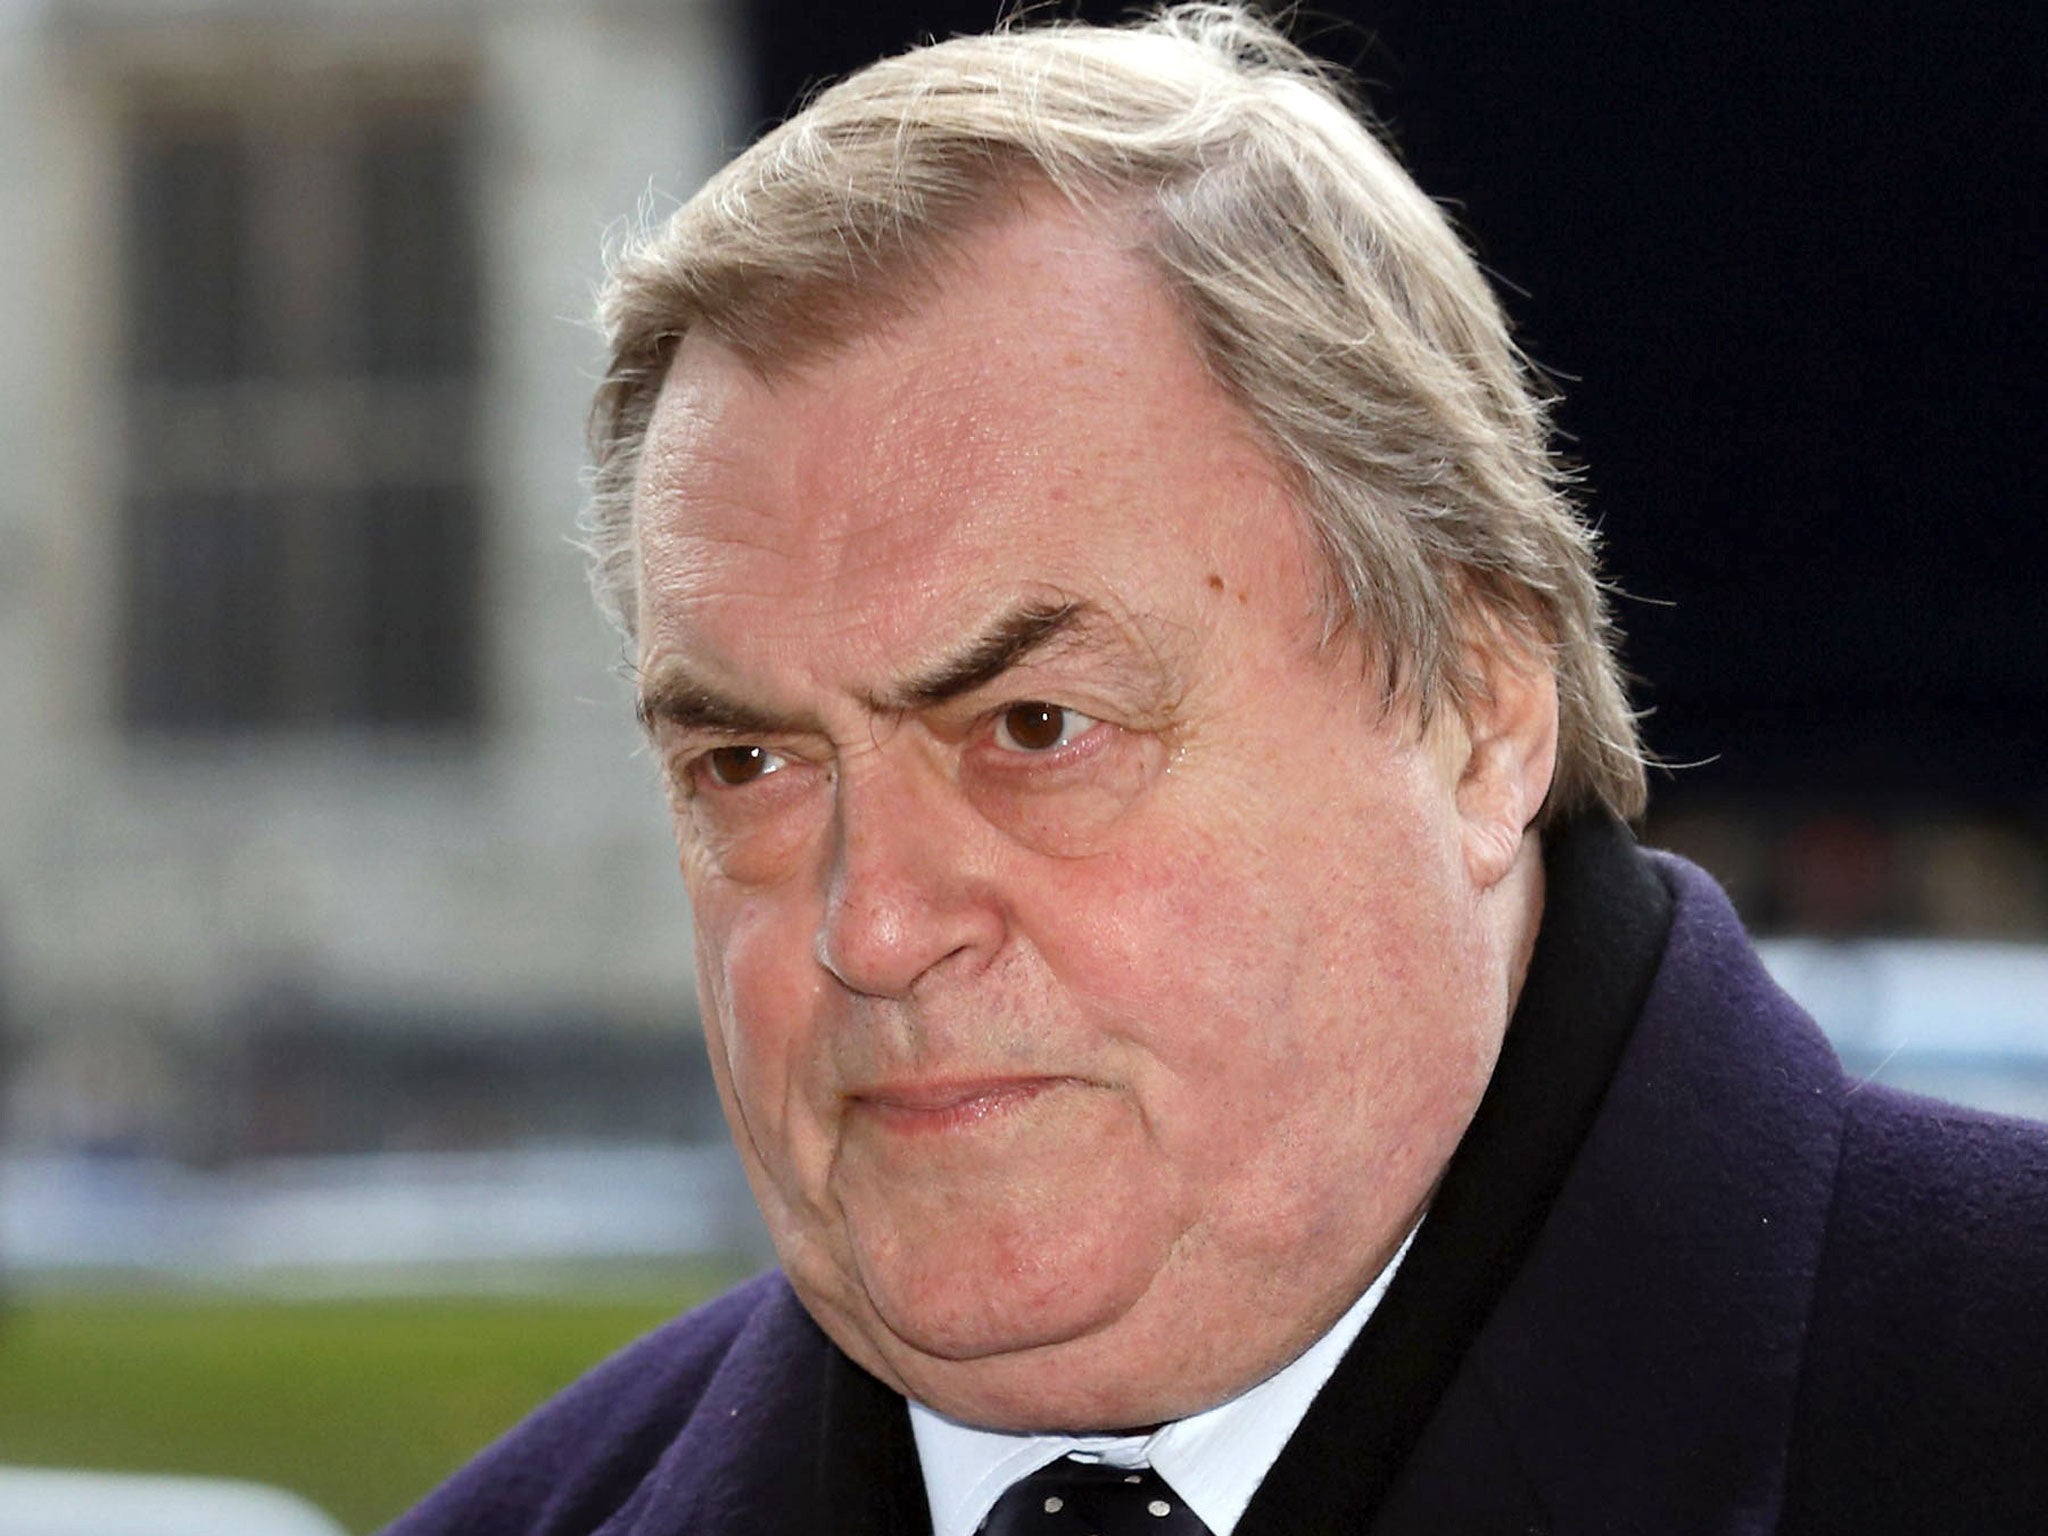 John Prescott was one of many who took to twitter to voice their reaction to the Leveson report